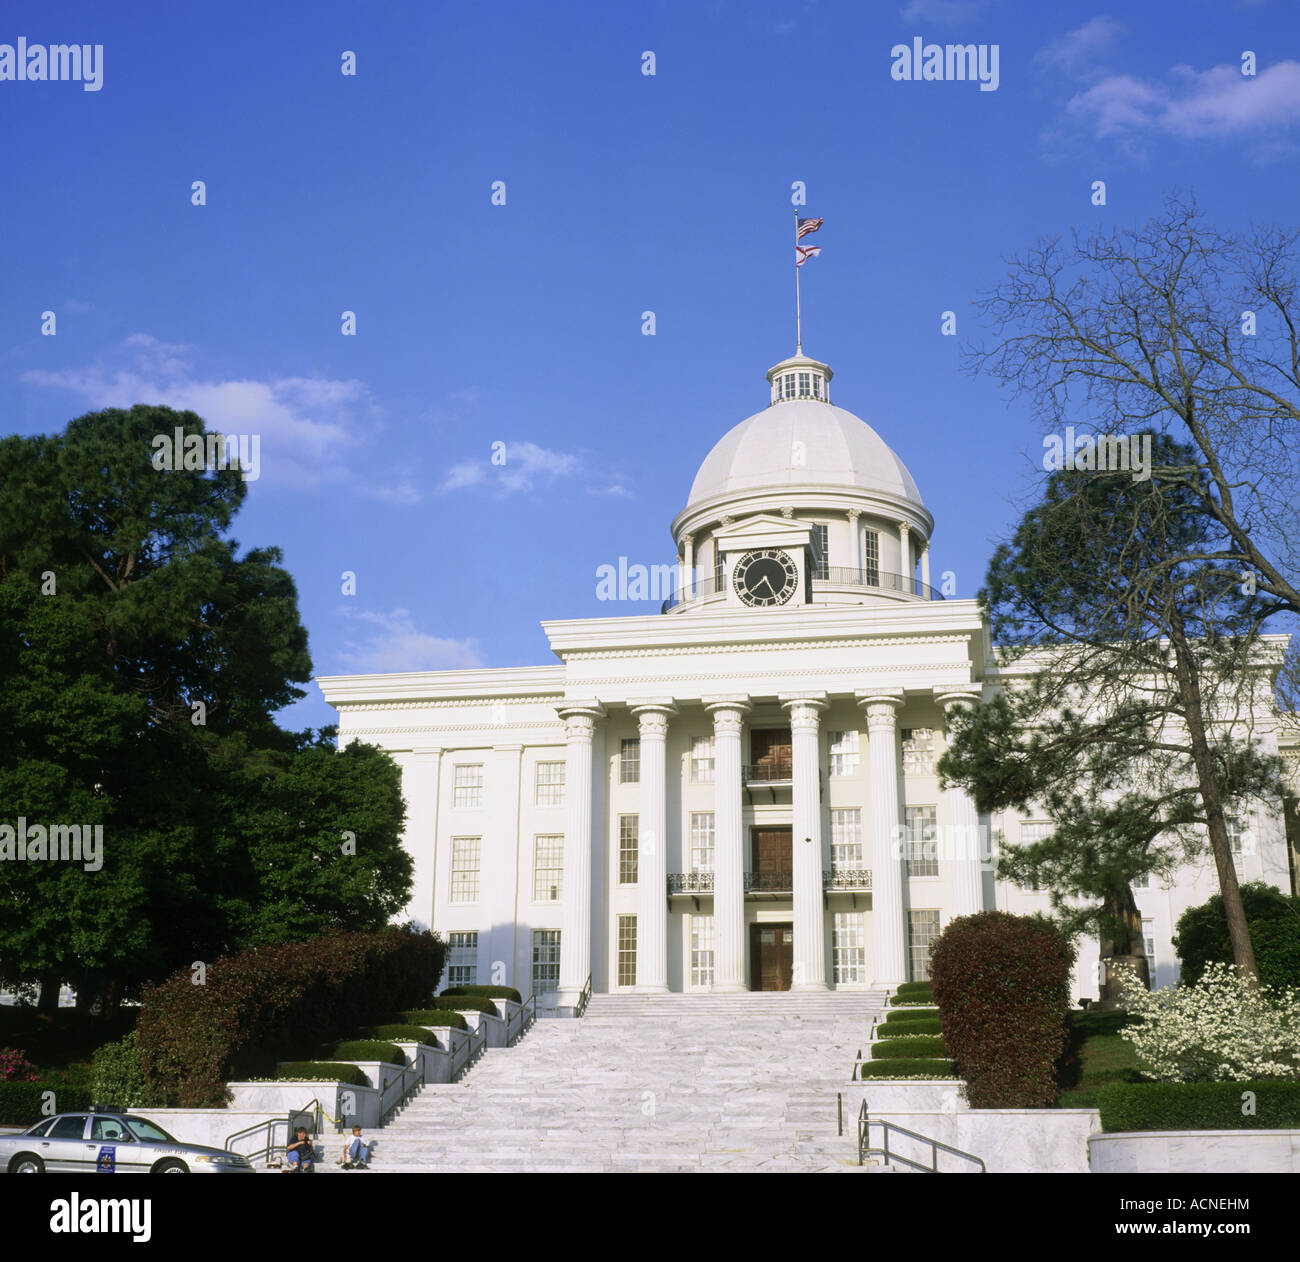 Top 98+ Images what is the capital of alabama? Sharp